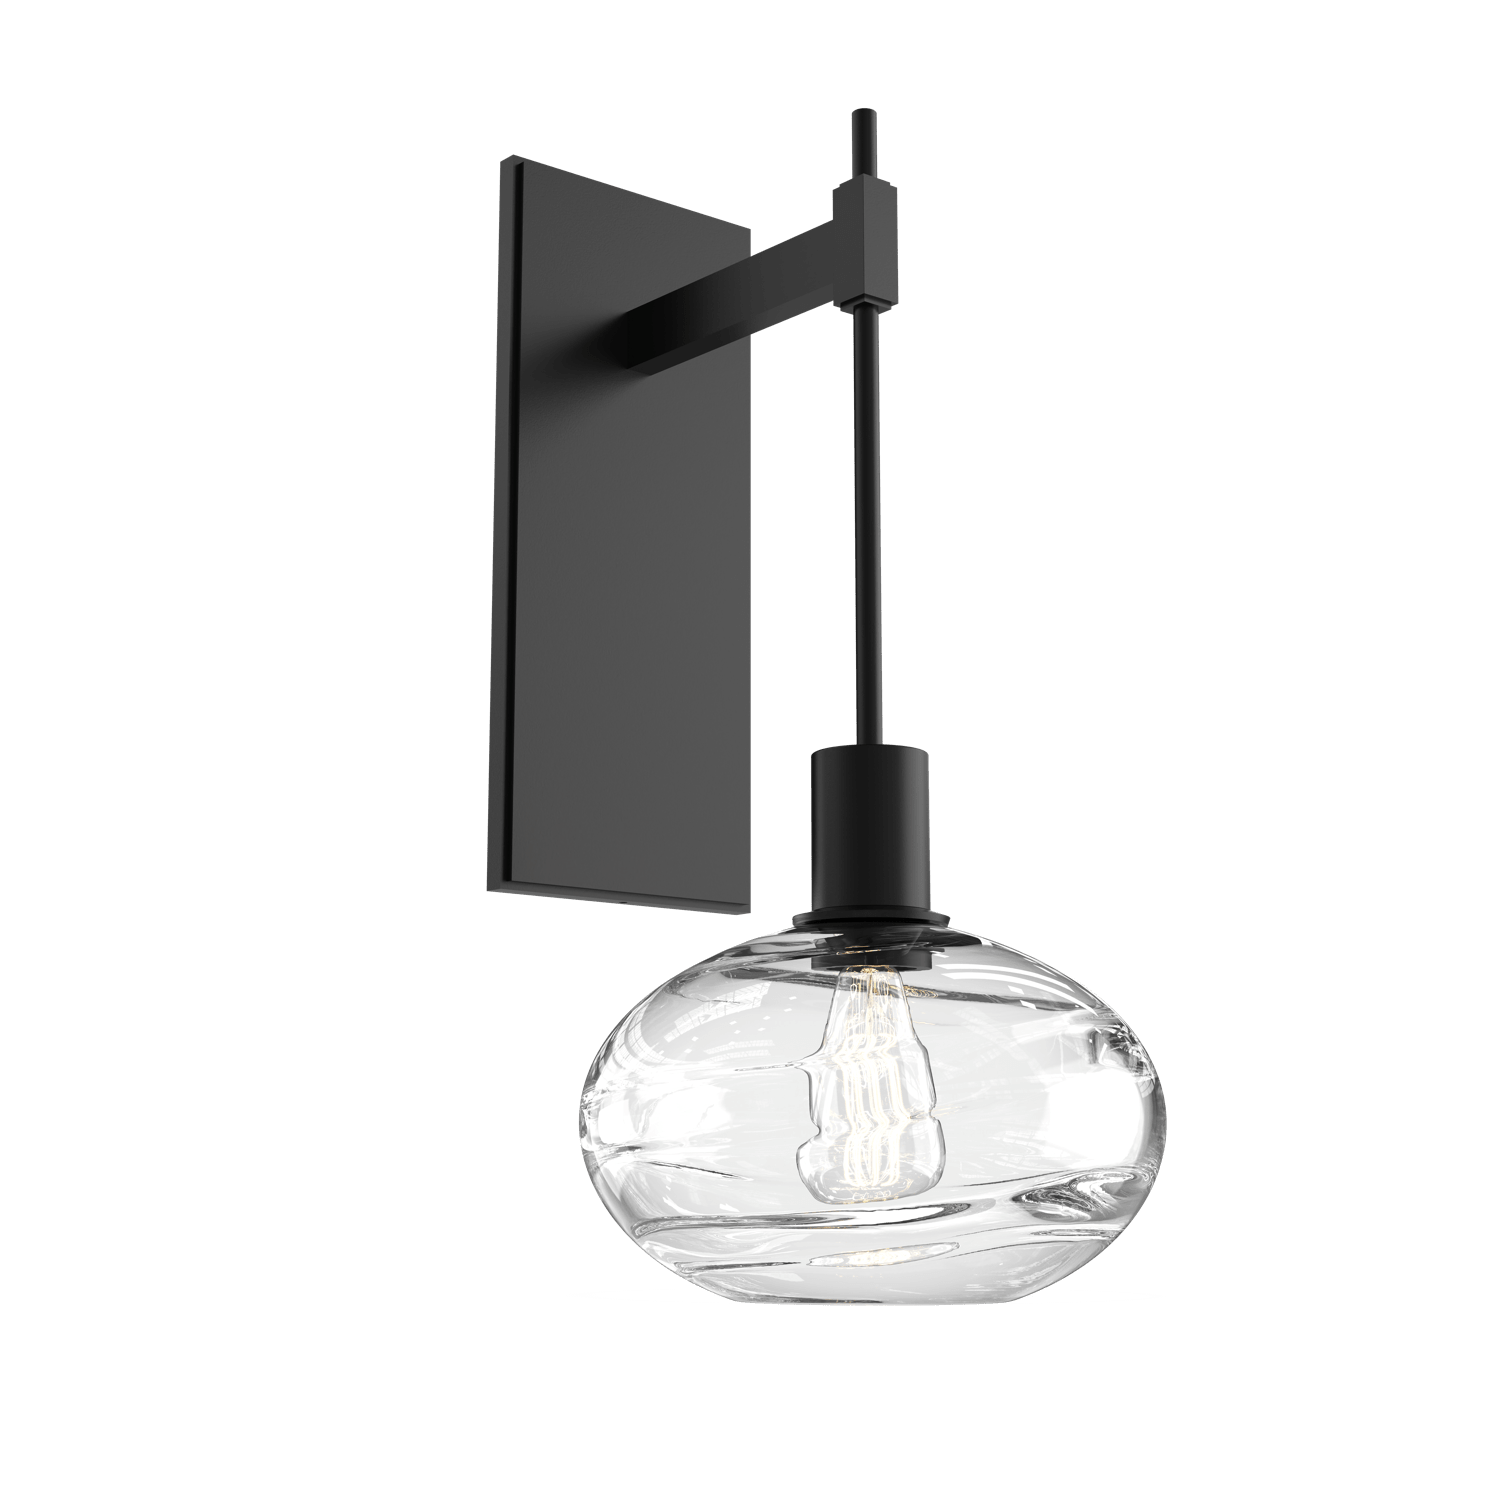 IDB0036-18-MB-OC-Hammerton-Studio-Optic-Blown-Glass-Coppa-tempo-wall-sconce-with-matte-black-finish-and-optic-clear-blown-glass-shades-and-incandescent-lamping